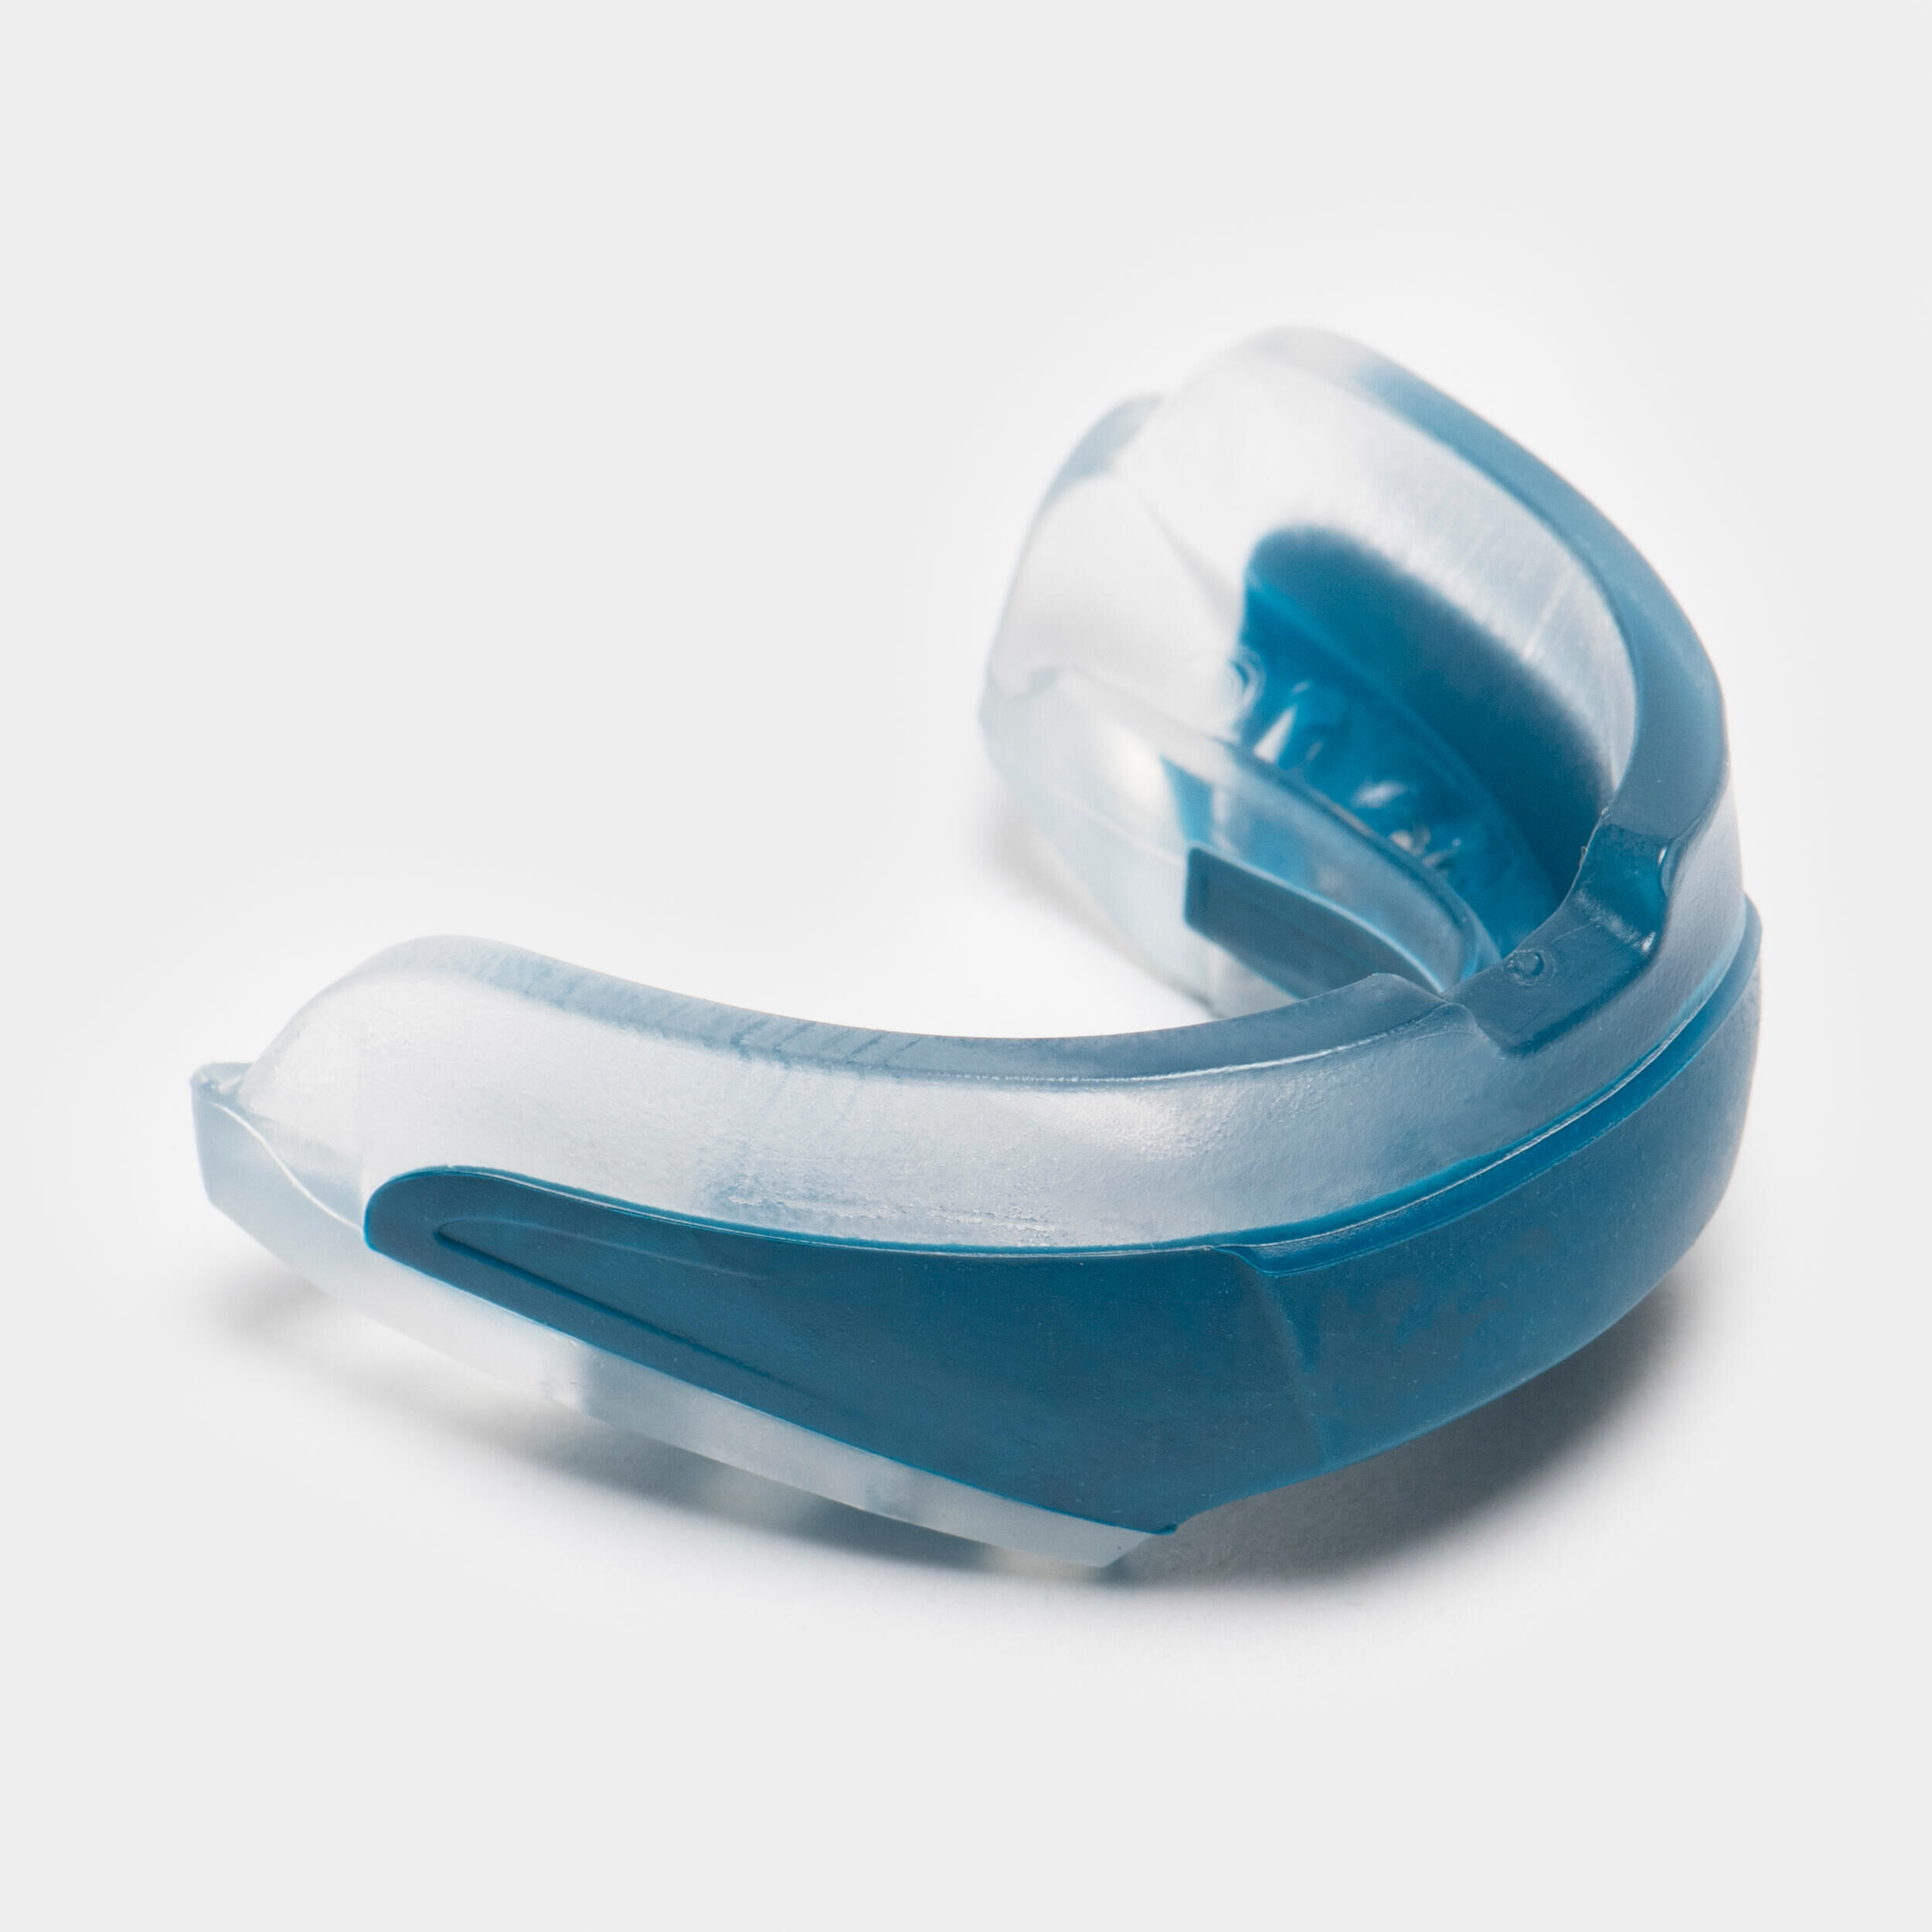 OFFLOAD Rugby Mouthguard R500 Size M - Blue